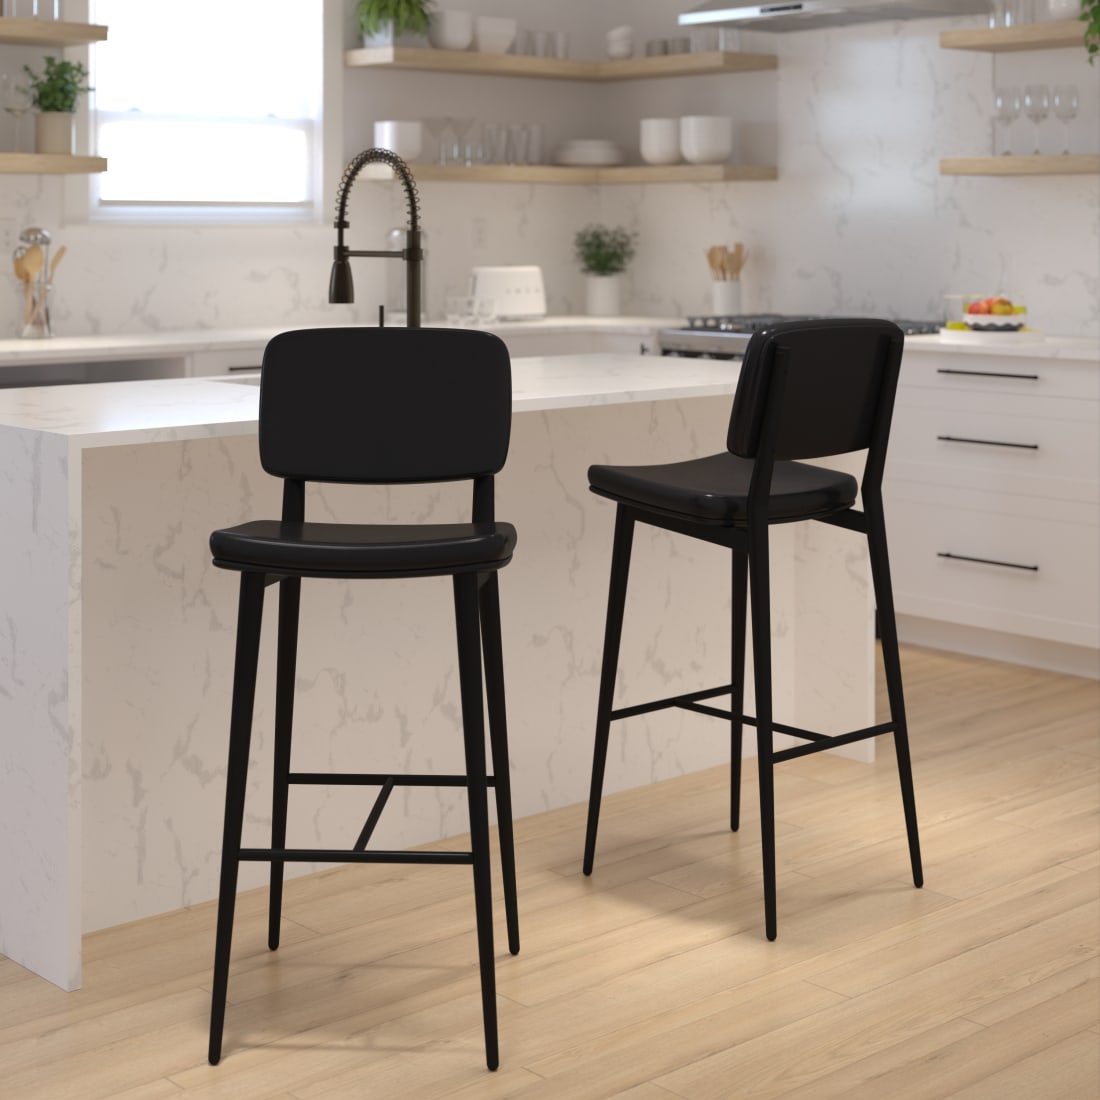 Kenzie Commercial Grade Mid-Back Barstools - Black LeatherSoft Upholstery - Black Iron Frame with Integrated Footrest - Set of 2